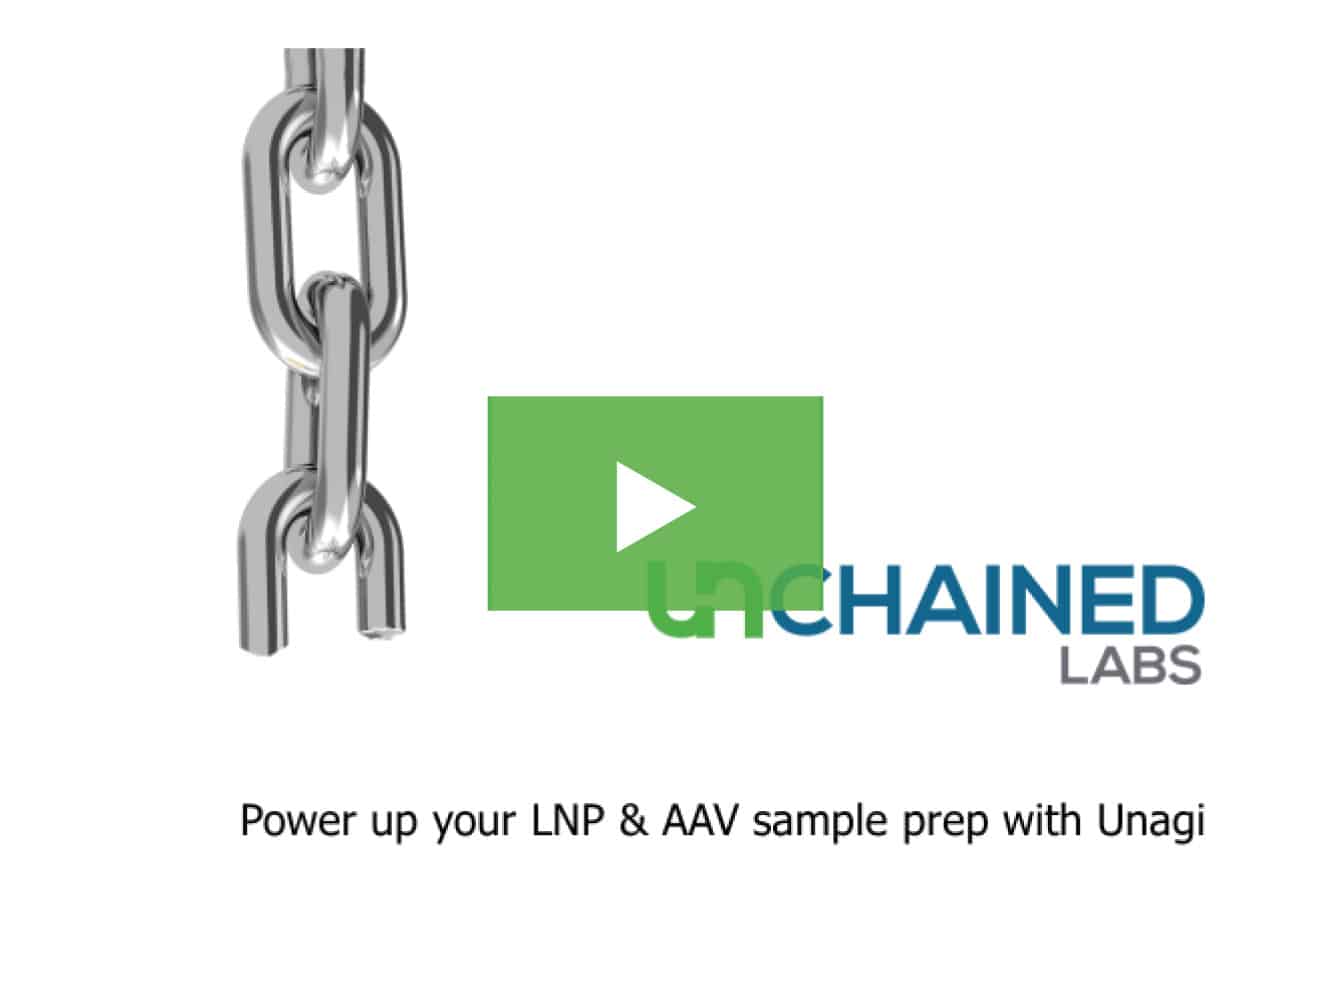 Power up your LNP & AAV sample prep